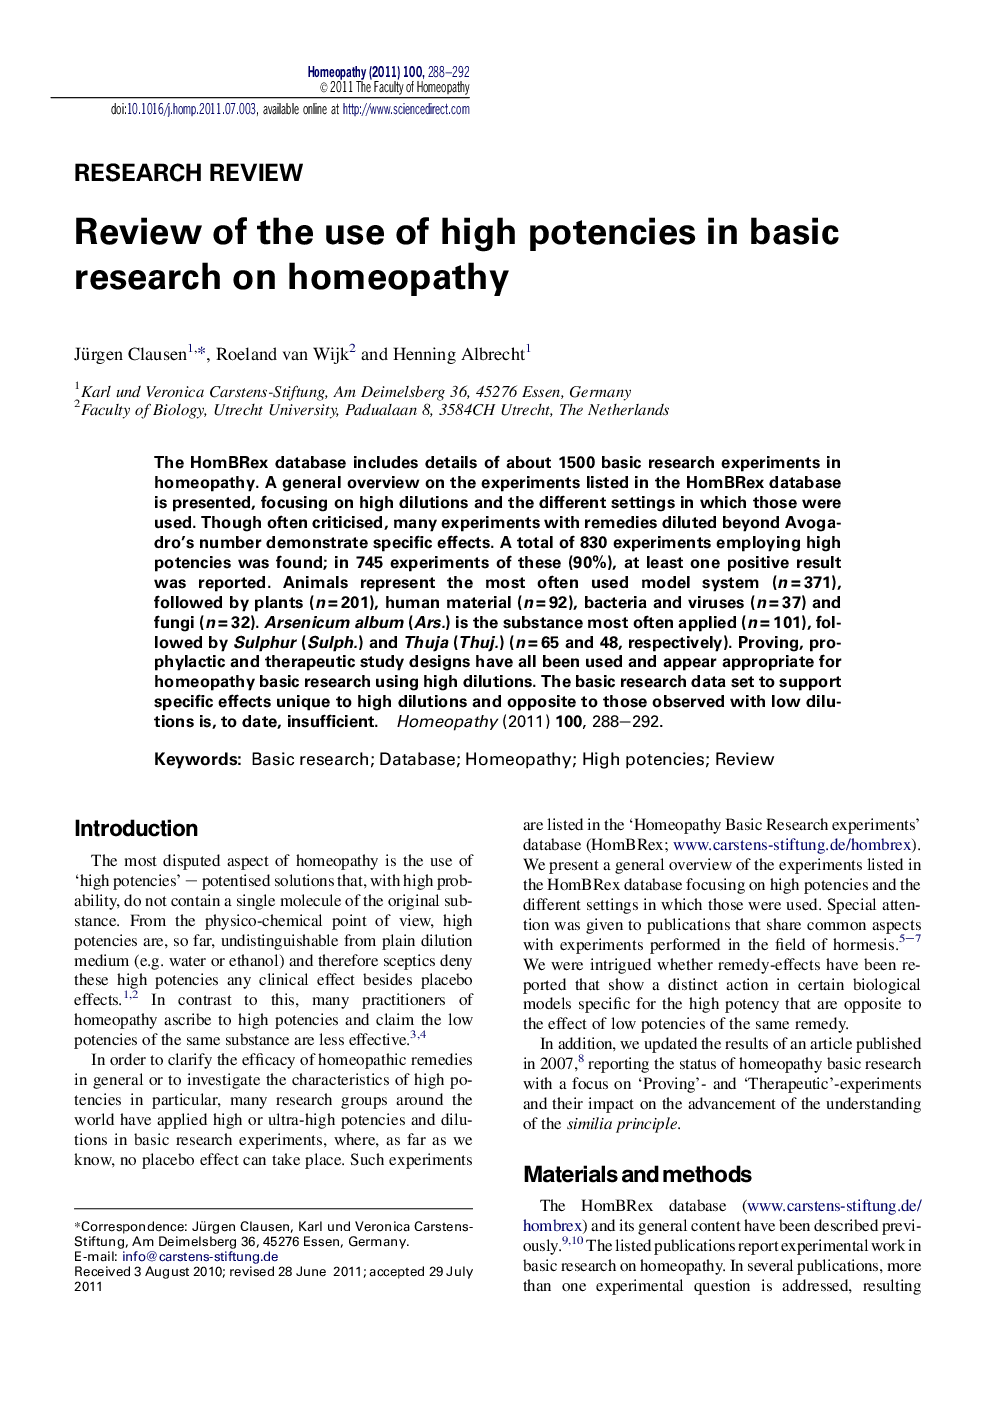 Review of the use of high potencies in basic research on homeopathy